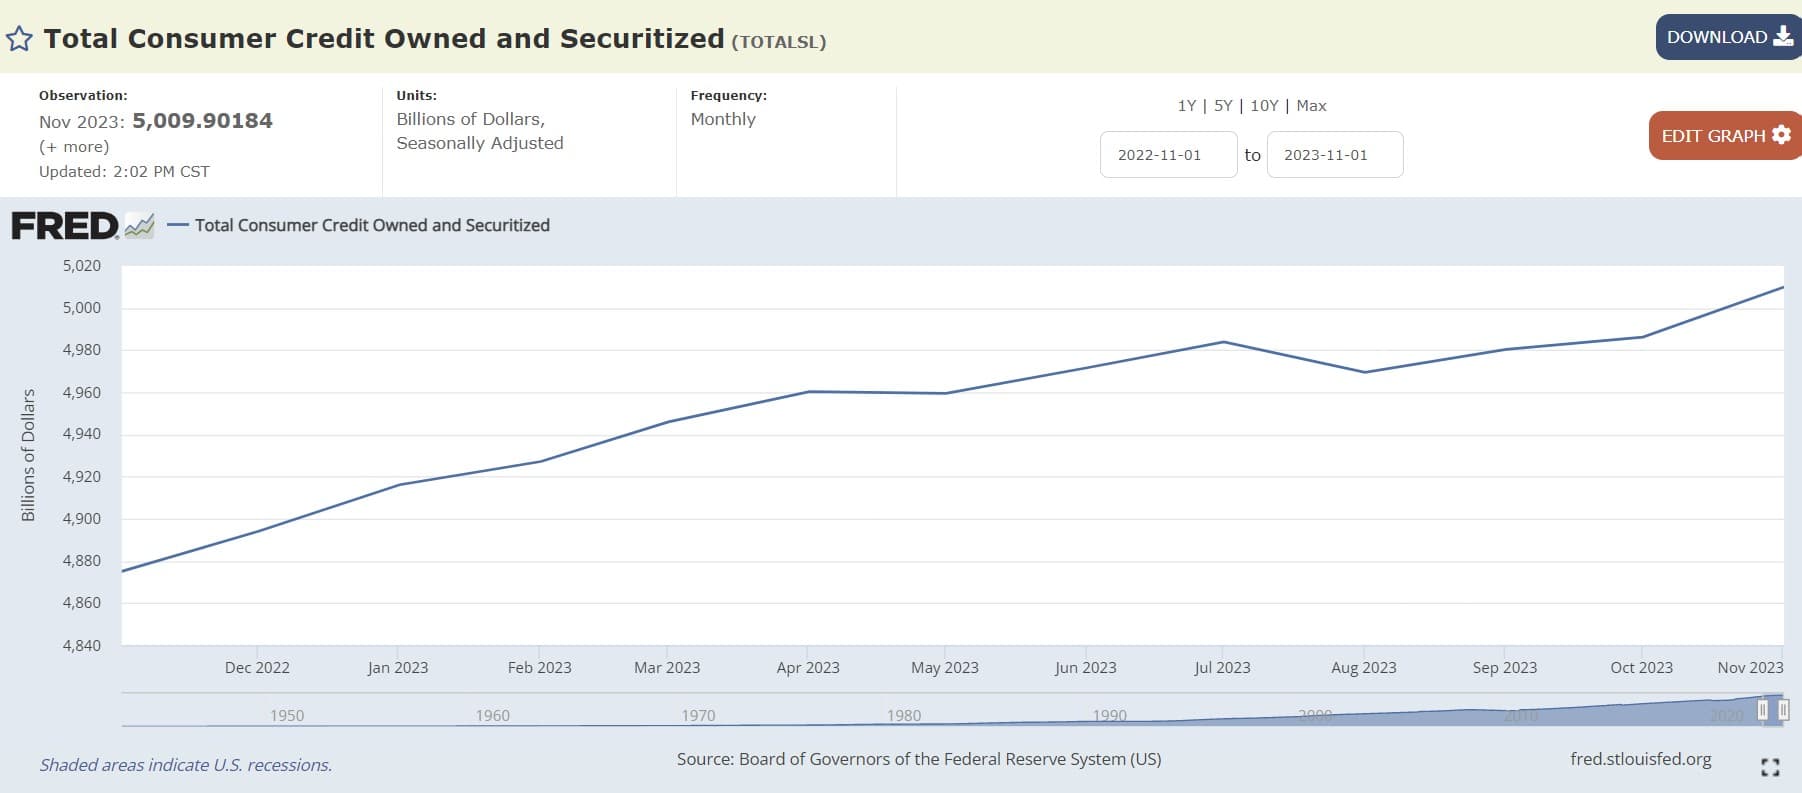  Total Consumer Credit Owned and Securitized